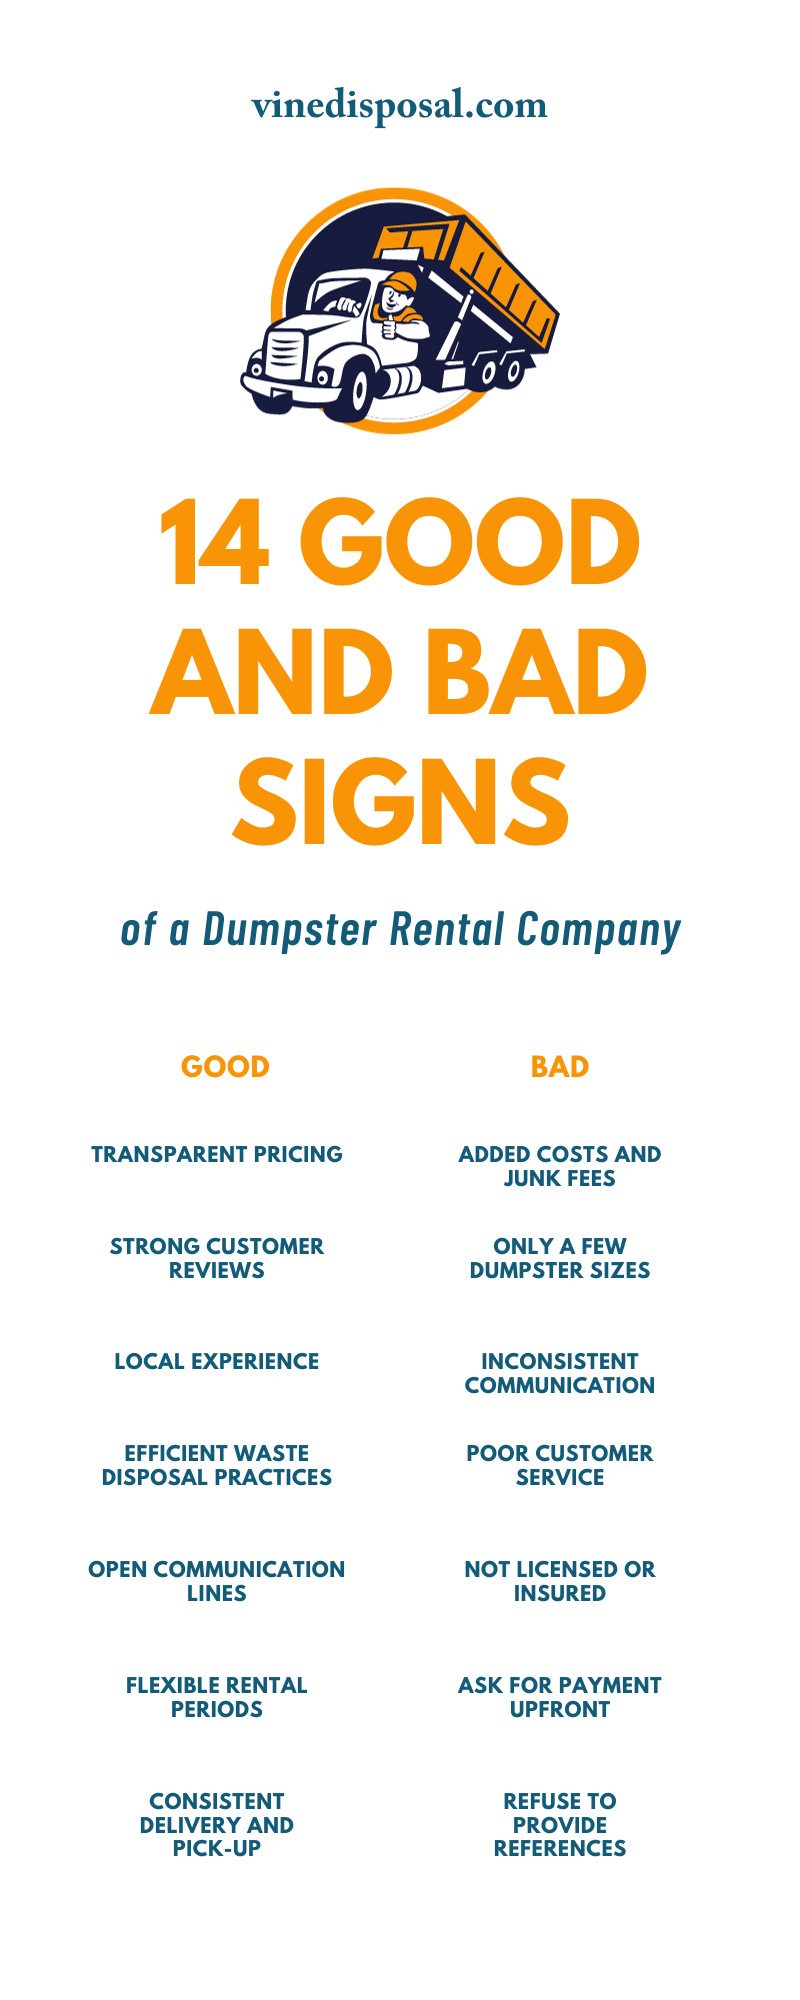 14 Good and Bad Signs of a Dumpster Rental Company